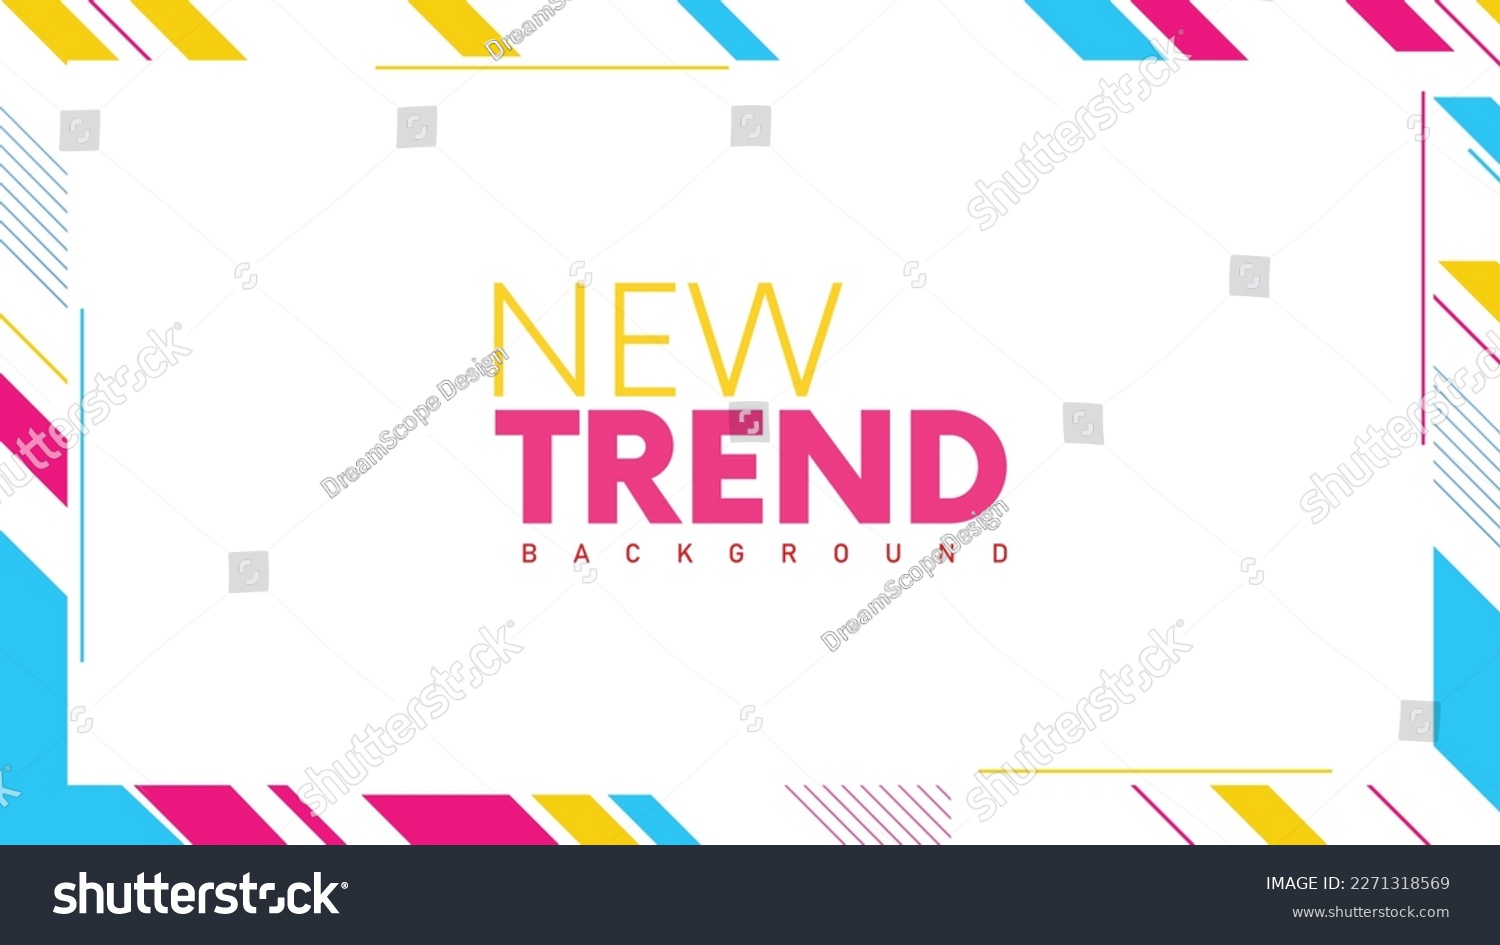 New Trend Modern Abstract Template Design. Geometrical Minimal Shape Elements. Innovative Layouts and Creative Illustrations. Minimalist Artwork and Geometric Shapes. Creative Cover Advertise Design.  #2271318569